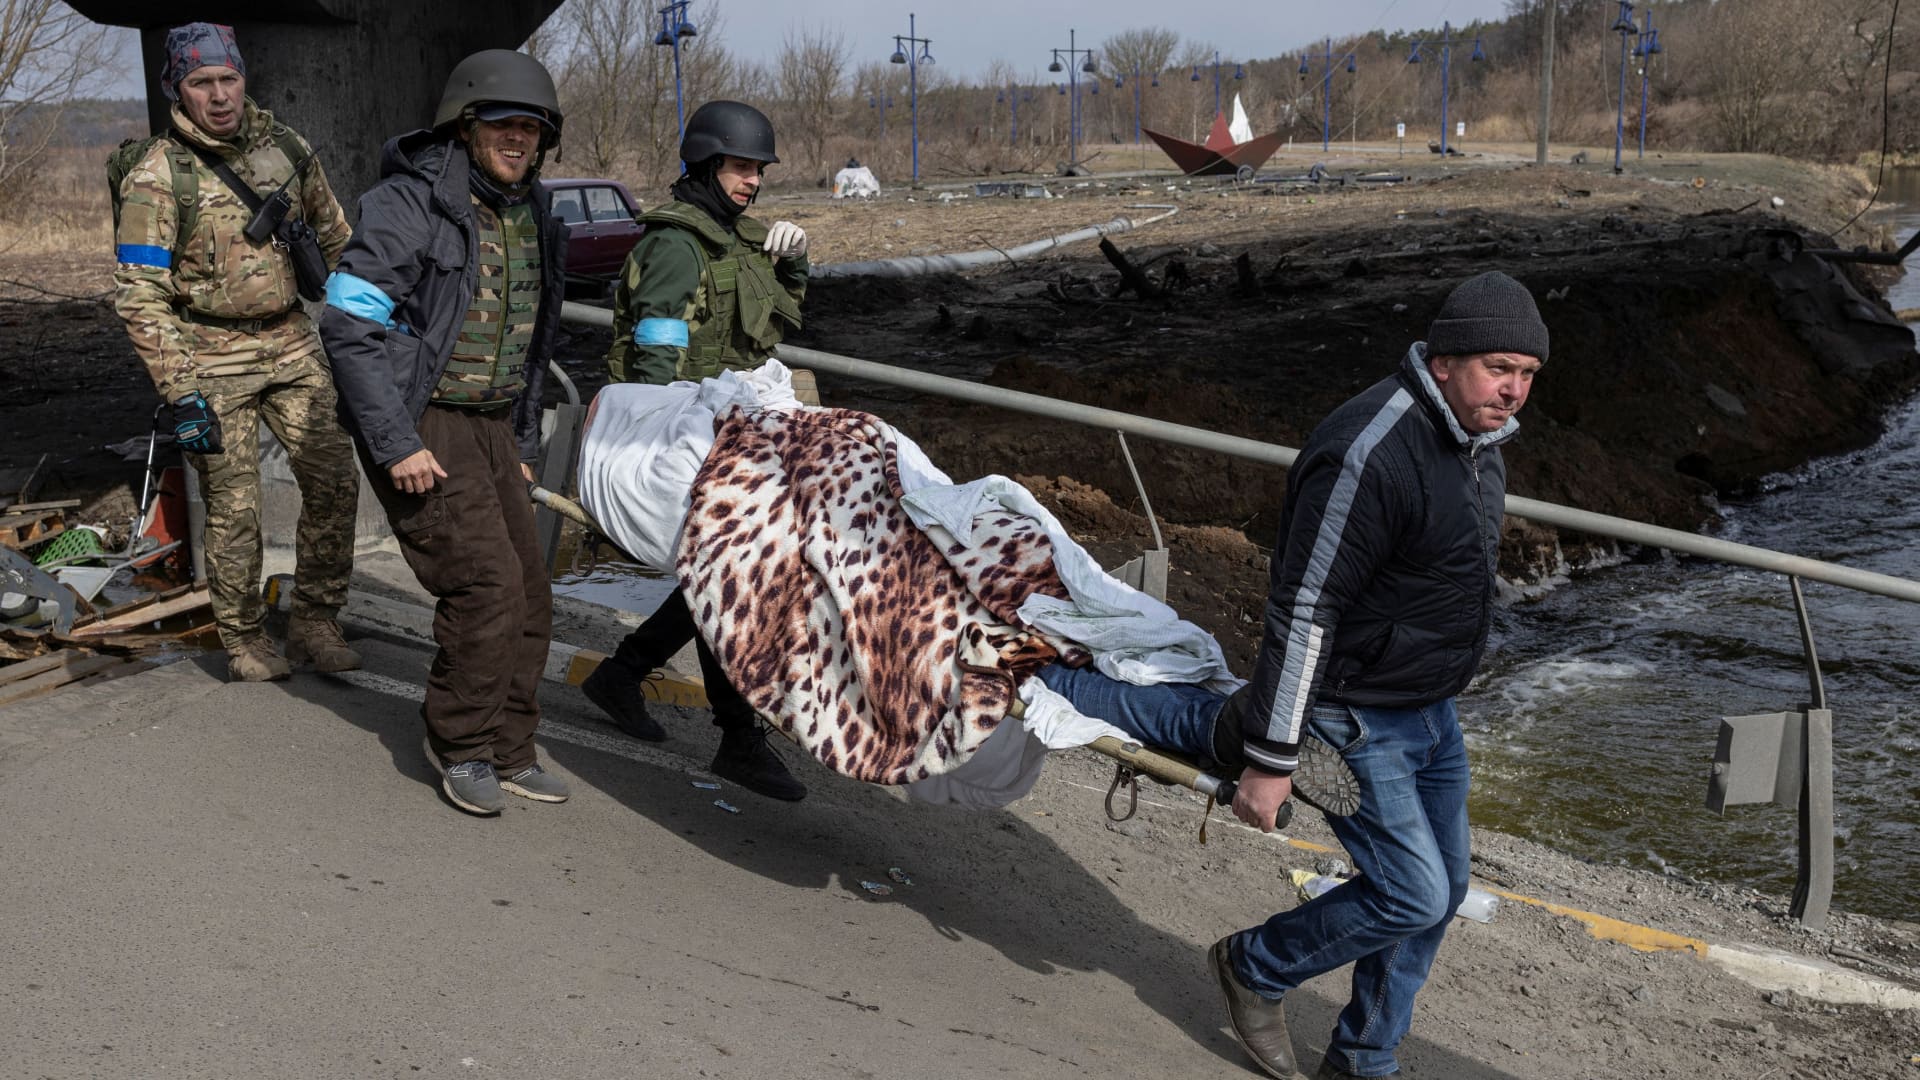 Ukrainian servicemen carry a dead body on stretcher as Russia's invasion of Ukraine continues, in the town of Irpin outside Kyiv, Ukraine, March 12, 2022.